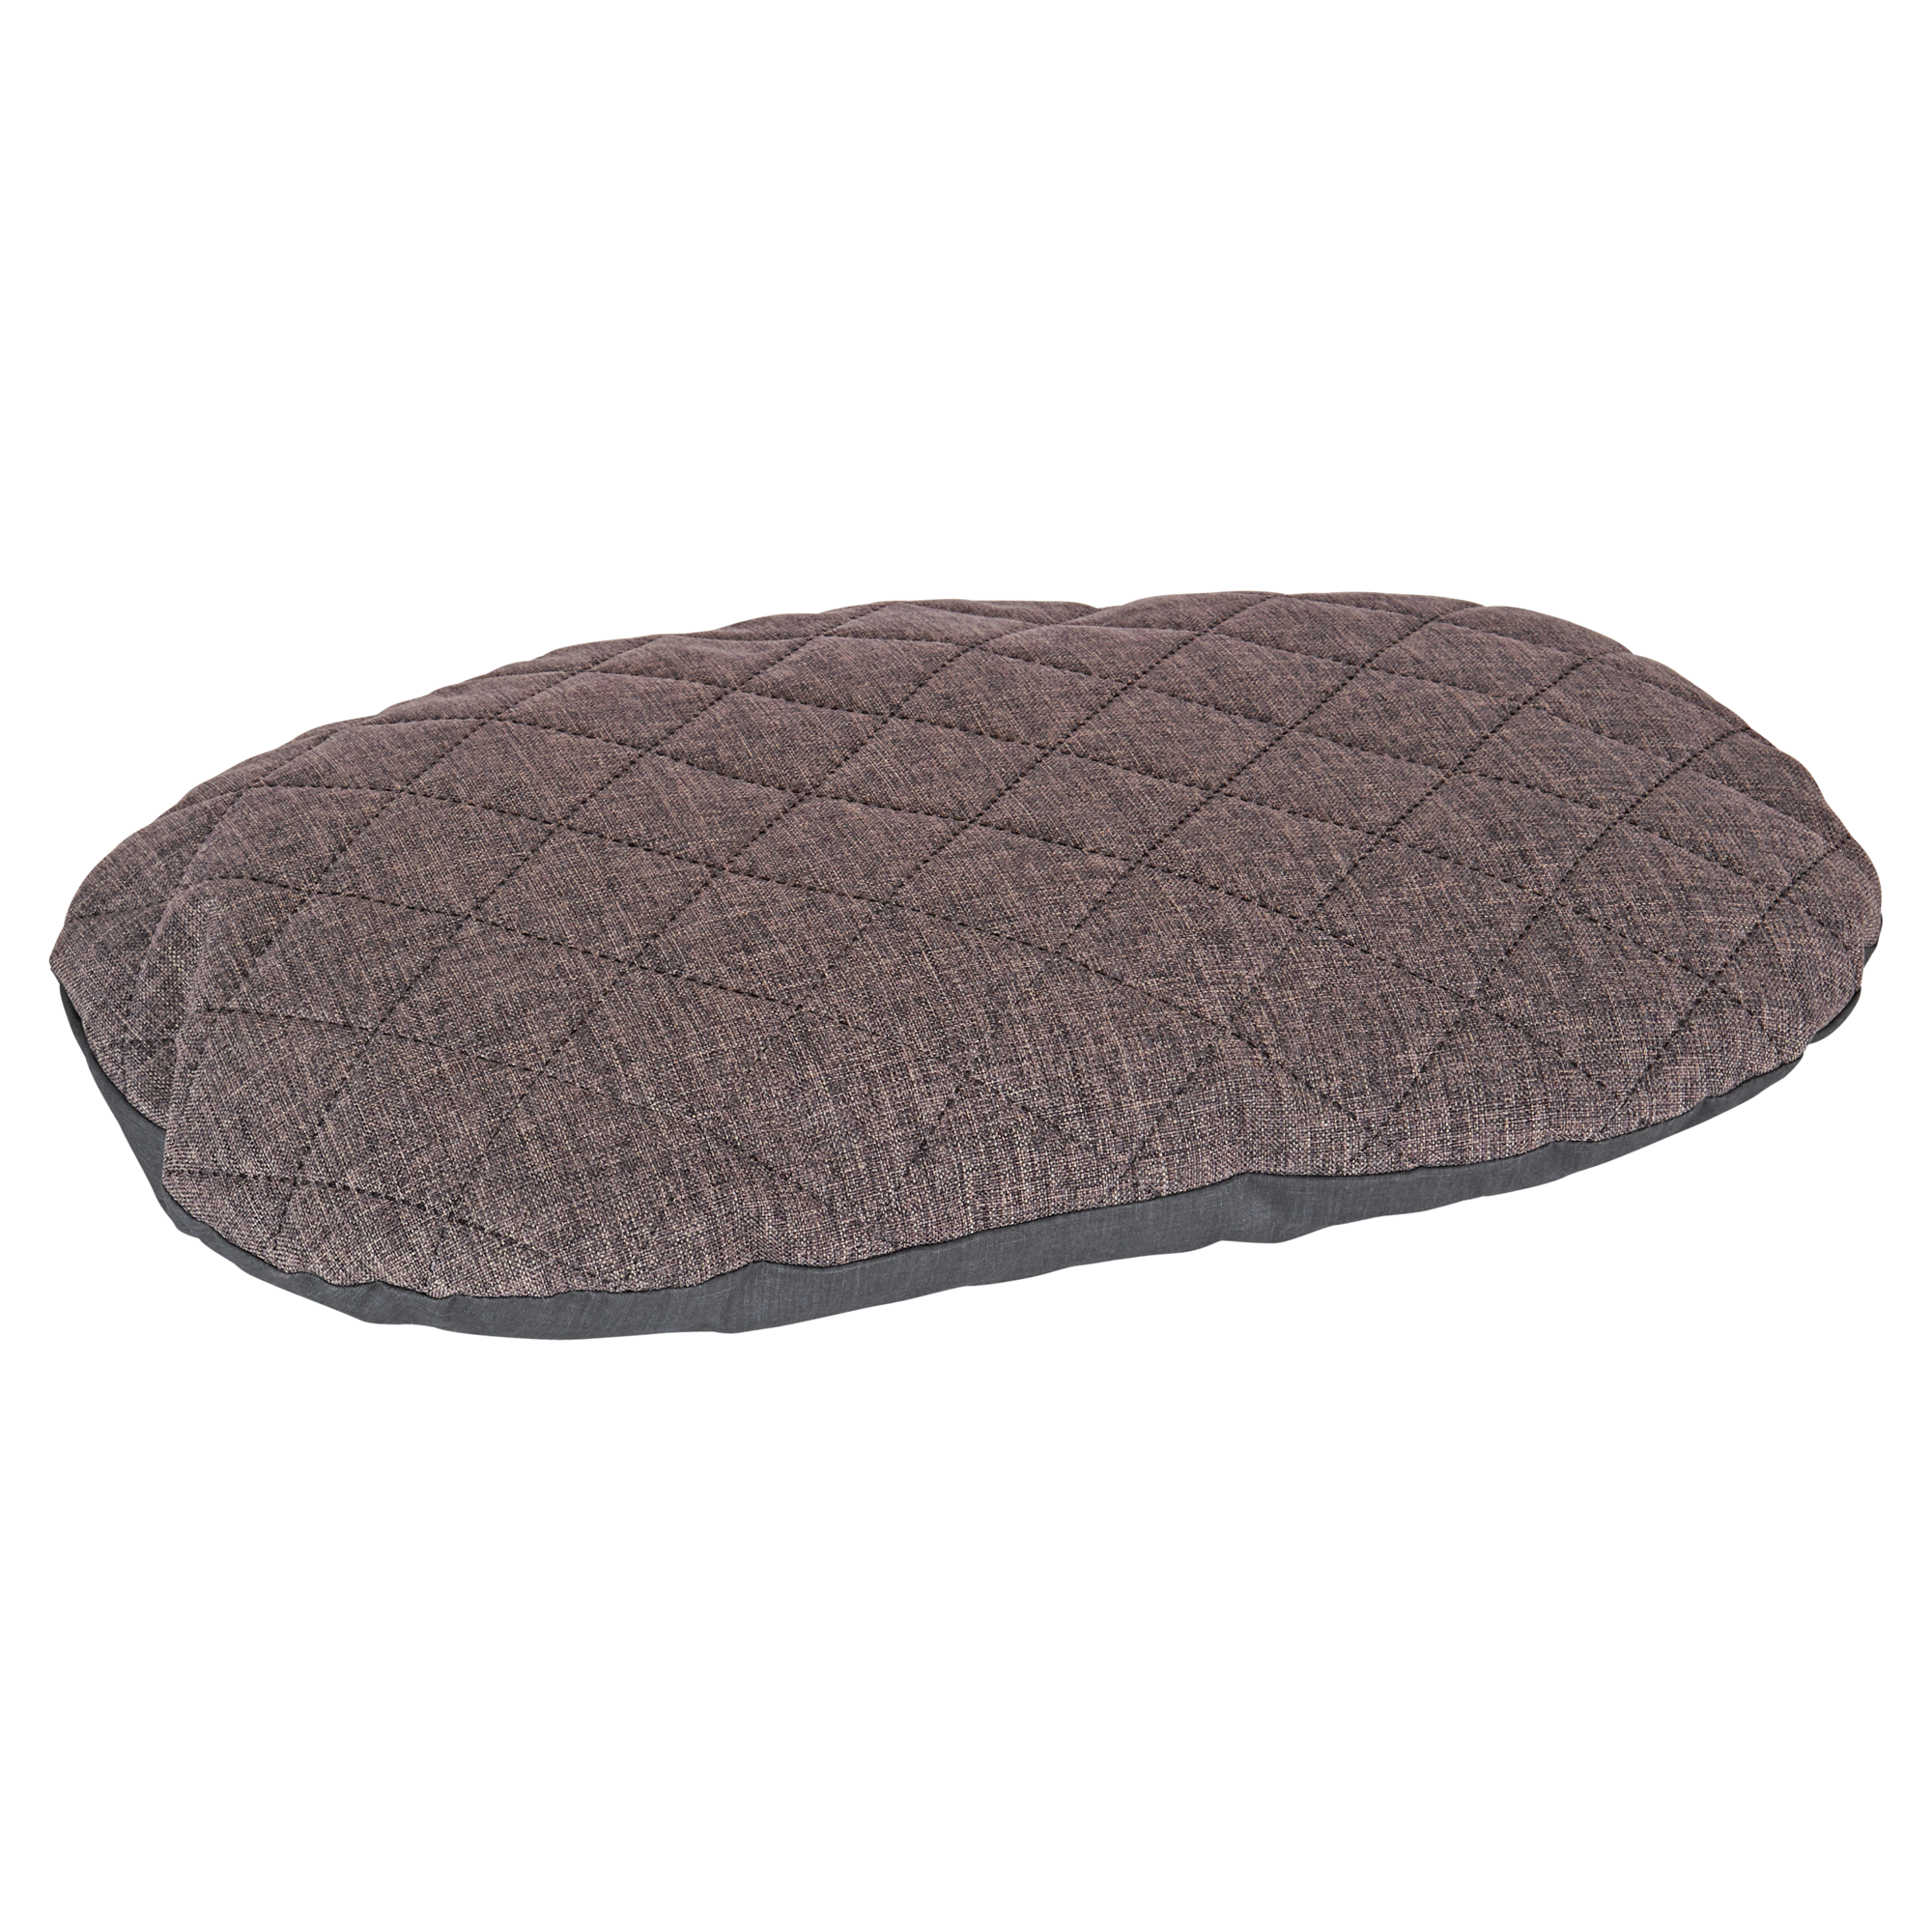 Hundekissen "Mano" oval Polyester/Baumwolle grau 50 cm + product picture